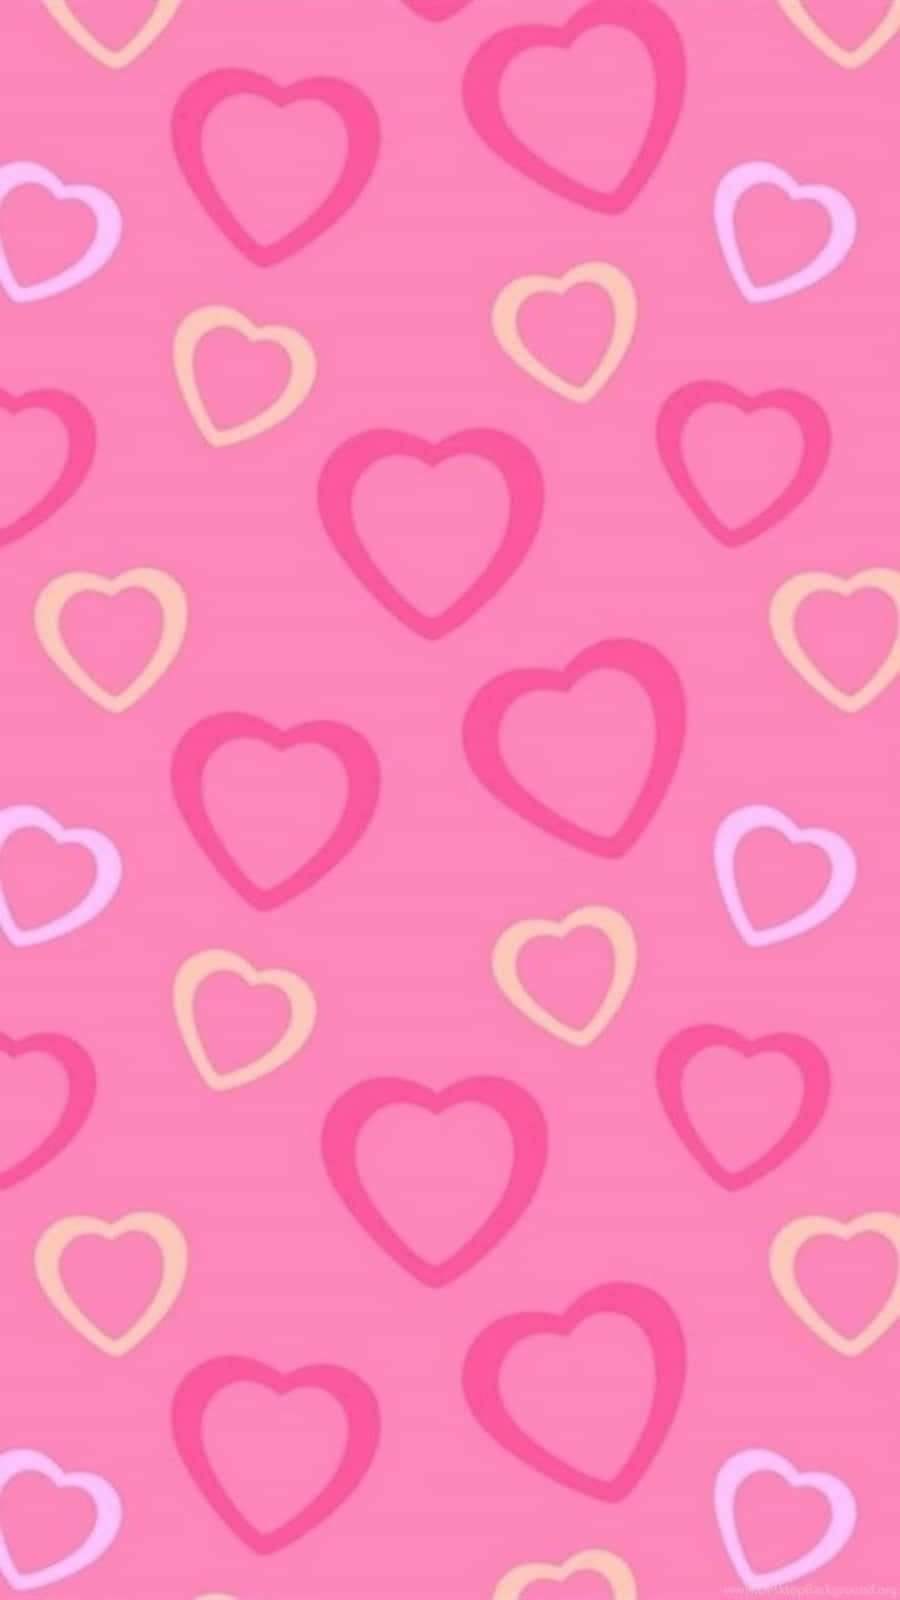 Pink Heart Pattern Girly Tumblr Background